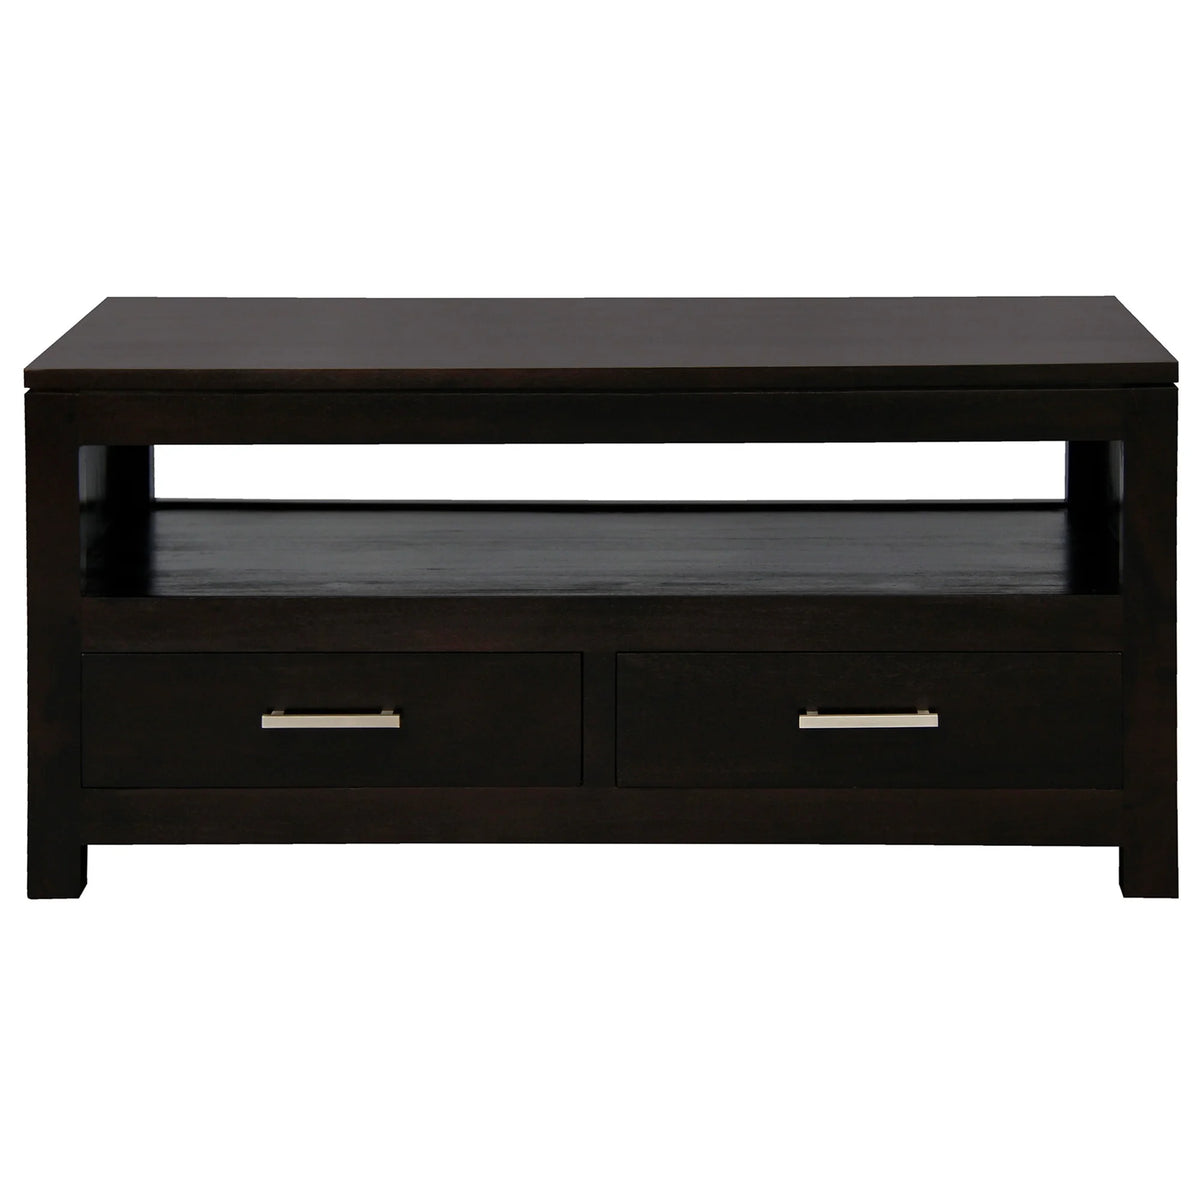 Paris Solid Timber 4 Drawer Coffee Table - Chocolate - Notbrand